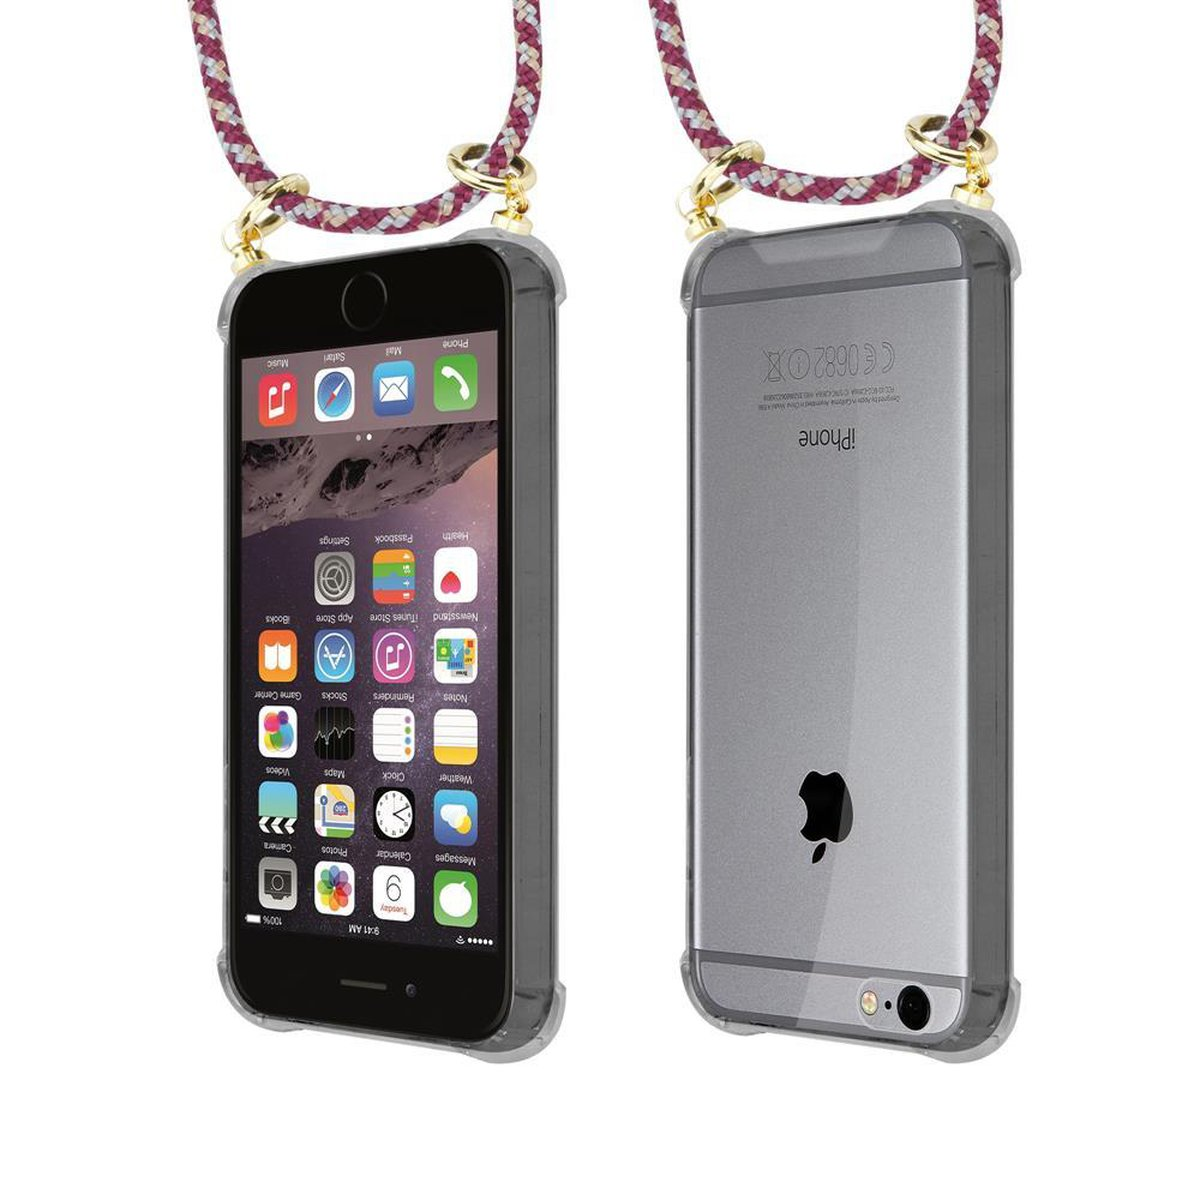 CADORABO Handy Kette mit WEIß 6 ROT / iPhone Band Apple, Kordel und Hülle, Gold Ringen, Backcover, 6S, abnehmbarer GELB